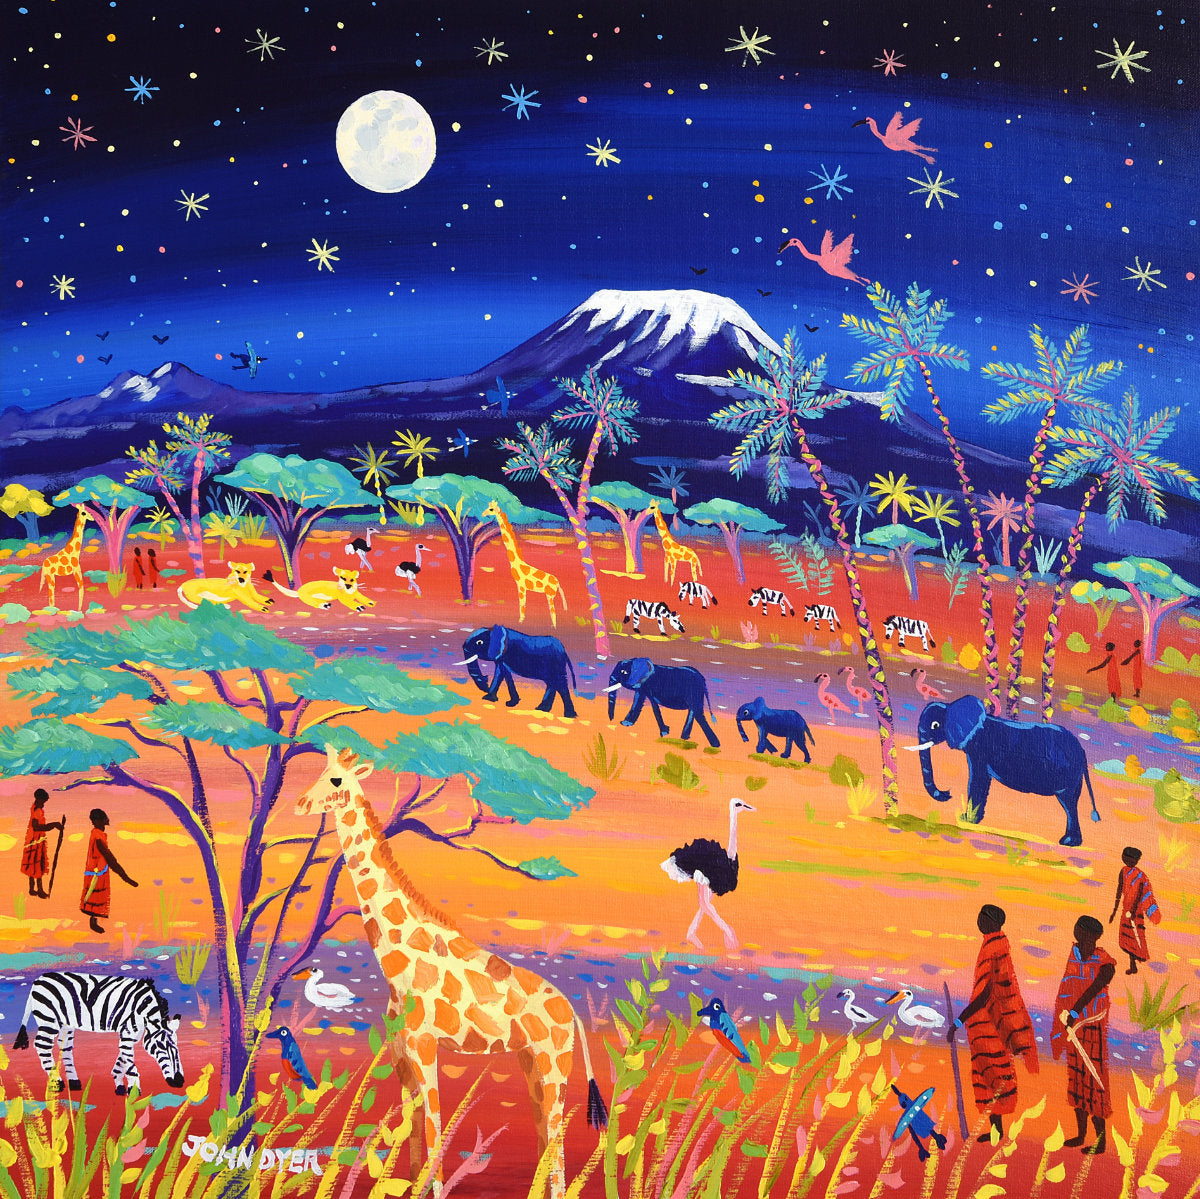 &#39;African Nights, Amboseli, Kenya&#39;, 24x24 inches acrylic on canvas. African Painting by British Artist John Dyer.